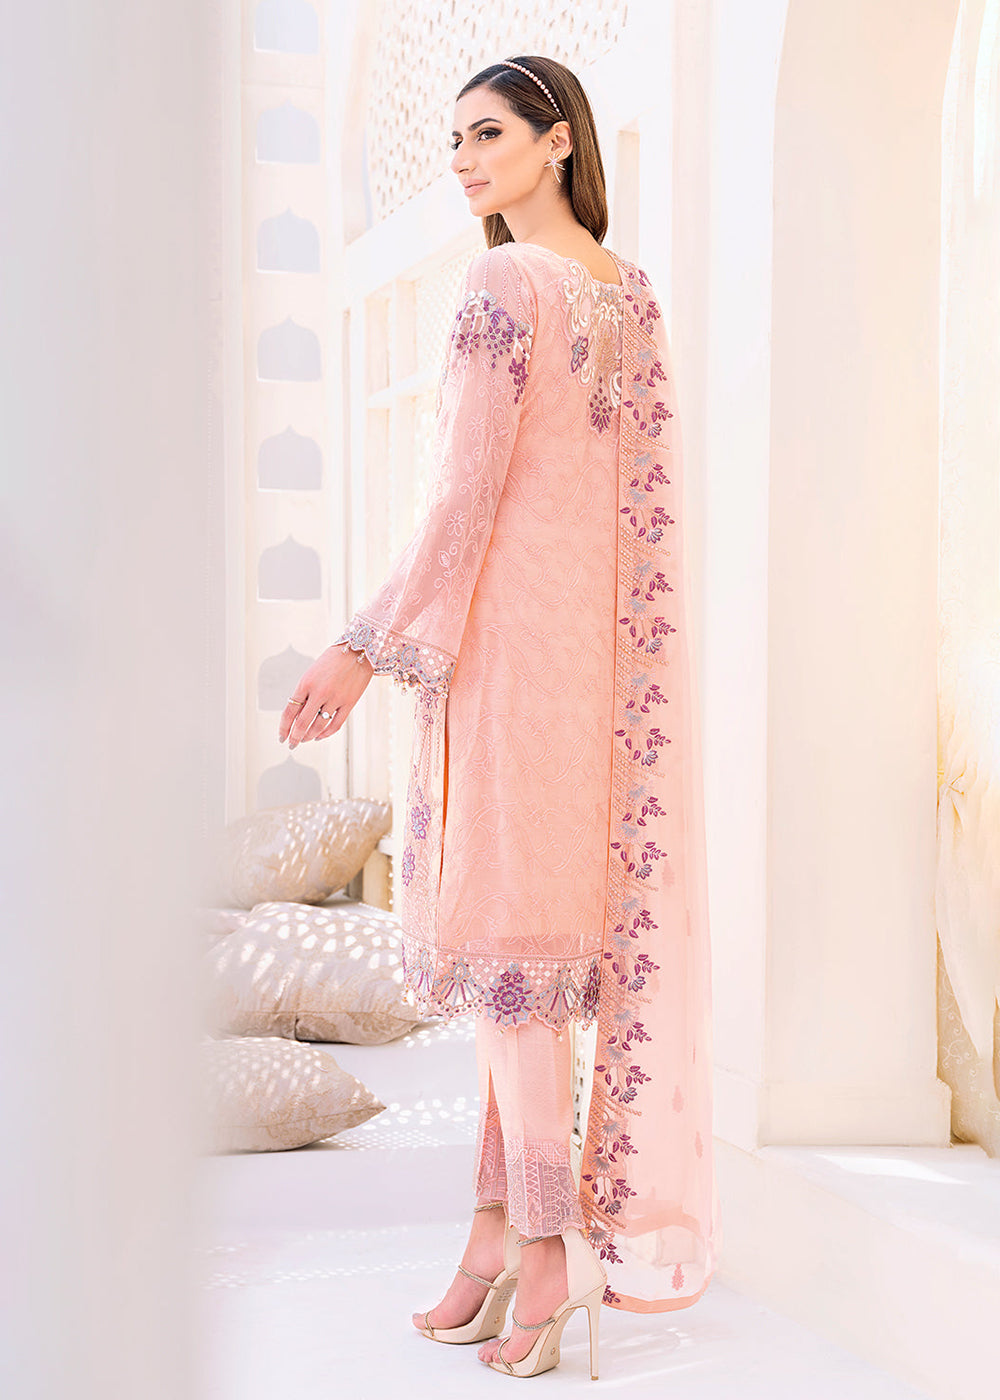 Buy Now Peach Embroidered Suit - Chiffon Vol 23 by Ramsha - #F-2304 Online in USA, UK, Canada & Worldwide at Empress Clothing. 